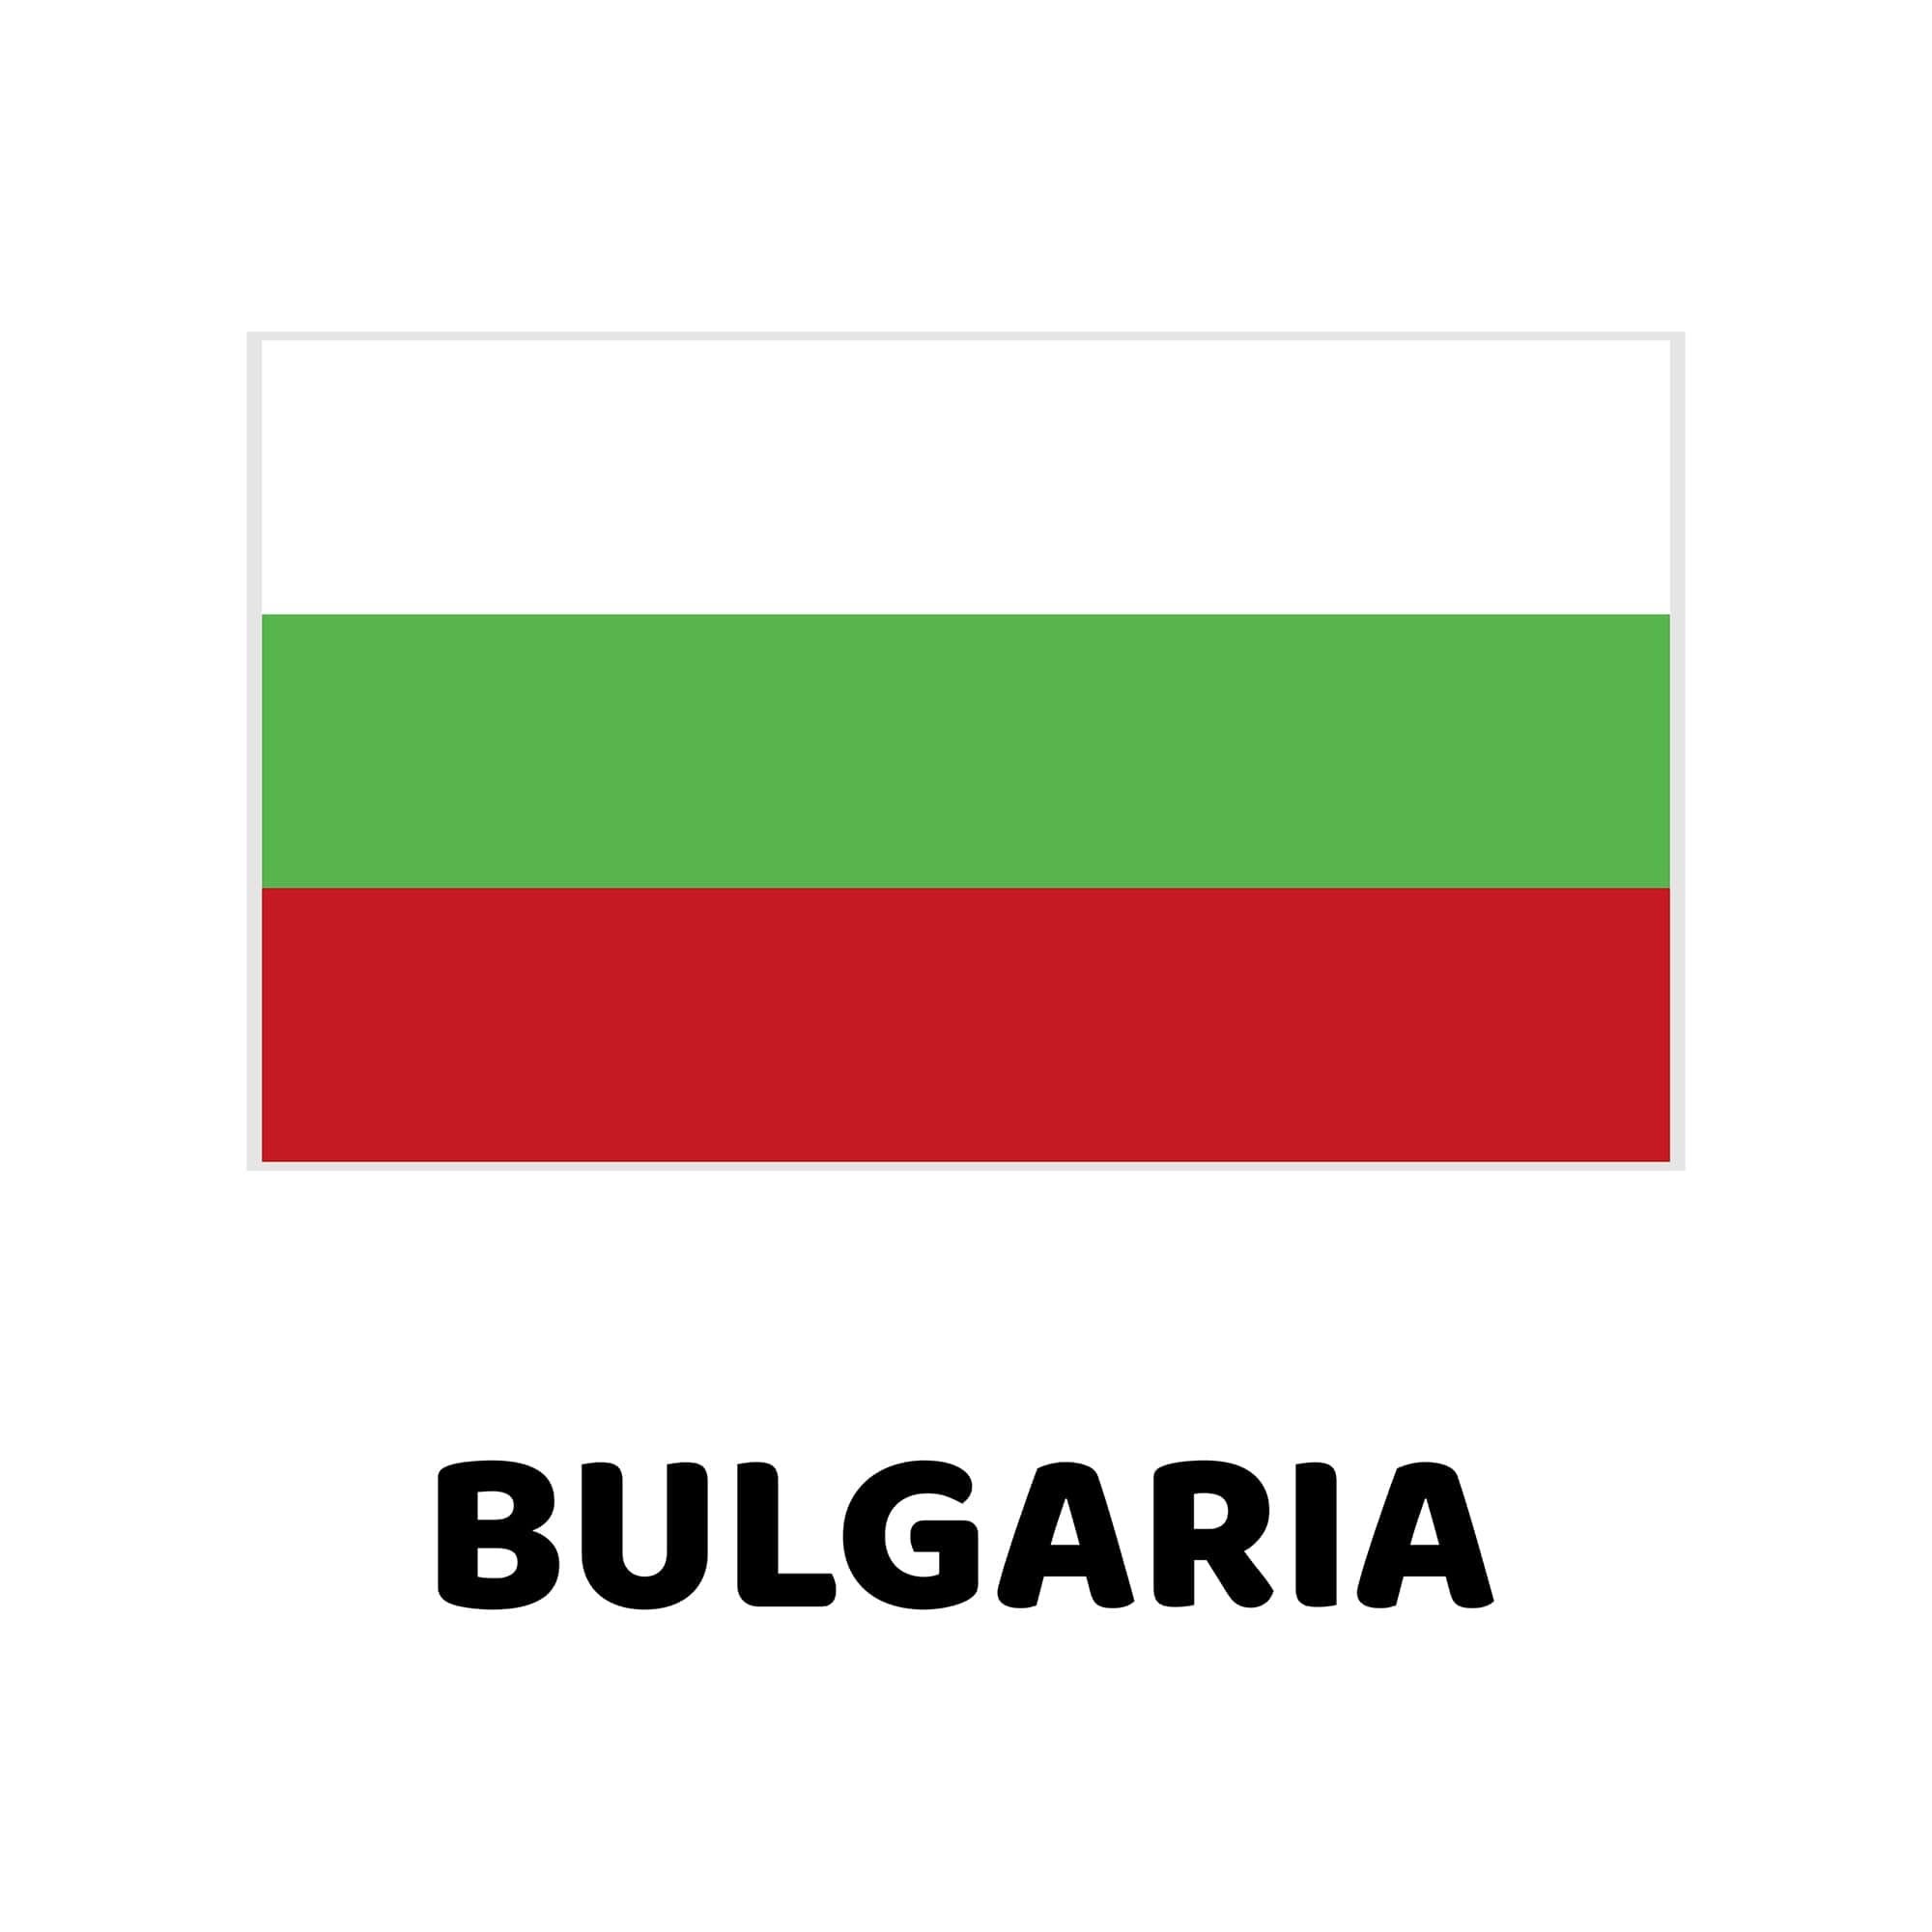 Bulgaria Country flag vector graphics for free download in ai, eps10 and svg format